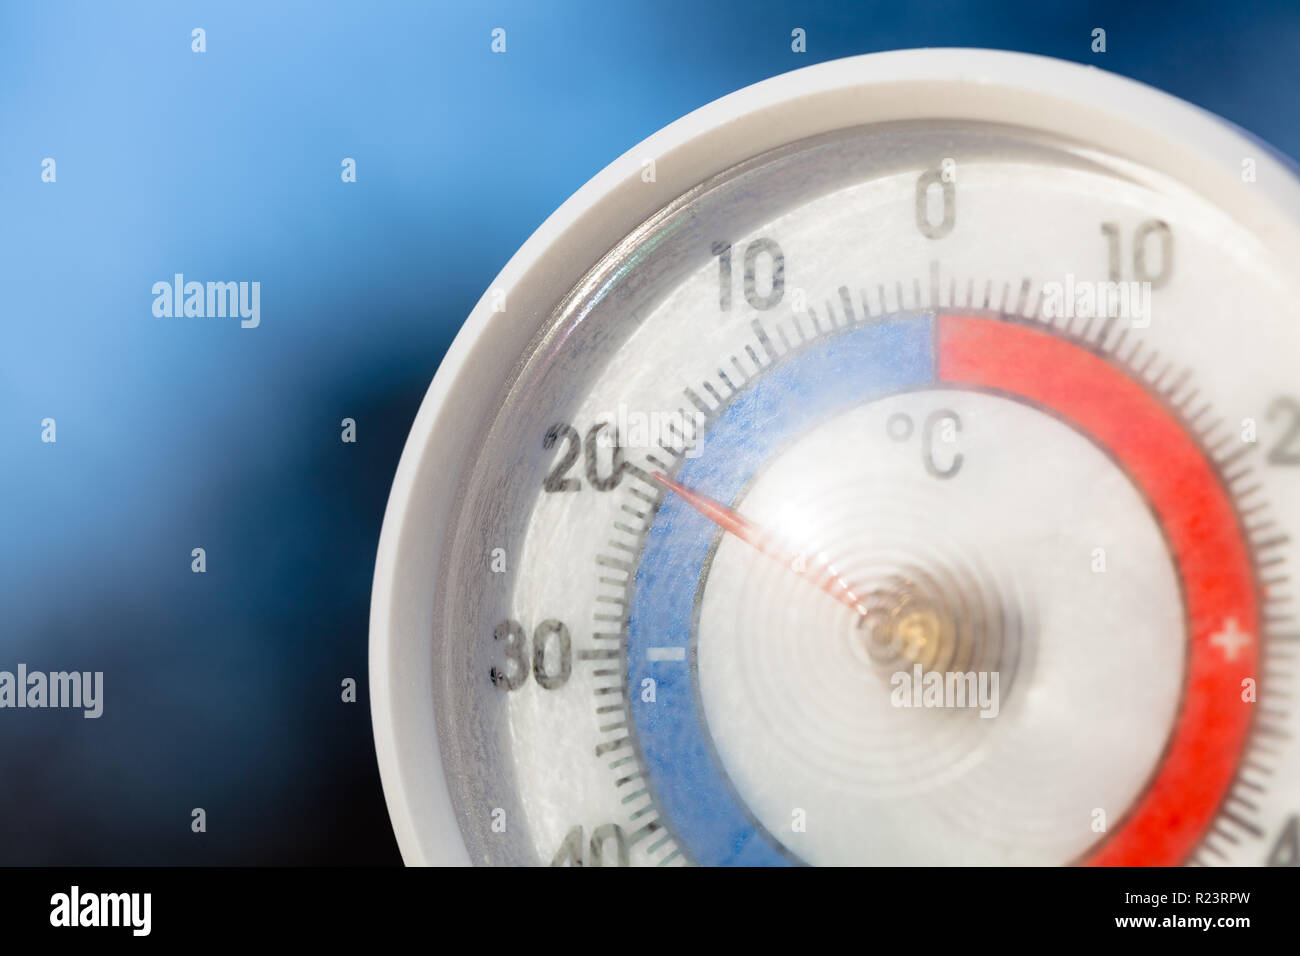 https://c8.alamy.com/comp/R23RPW/outdoor-thermometer-with-celsius-scale-showing-severe-freezing-temperature-cold-winter-weather-concept-R23RPW.jpg